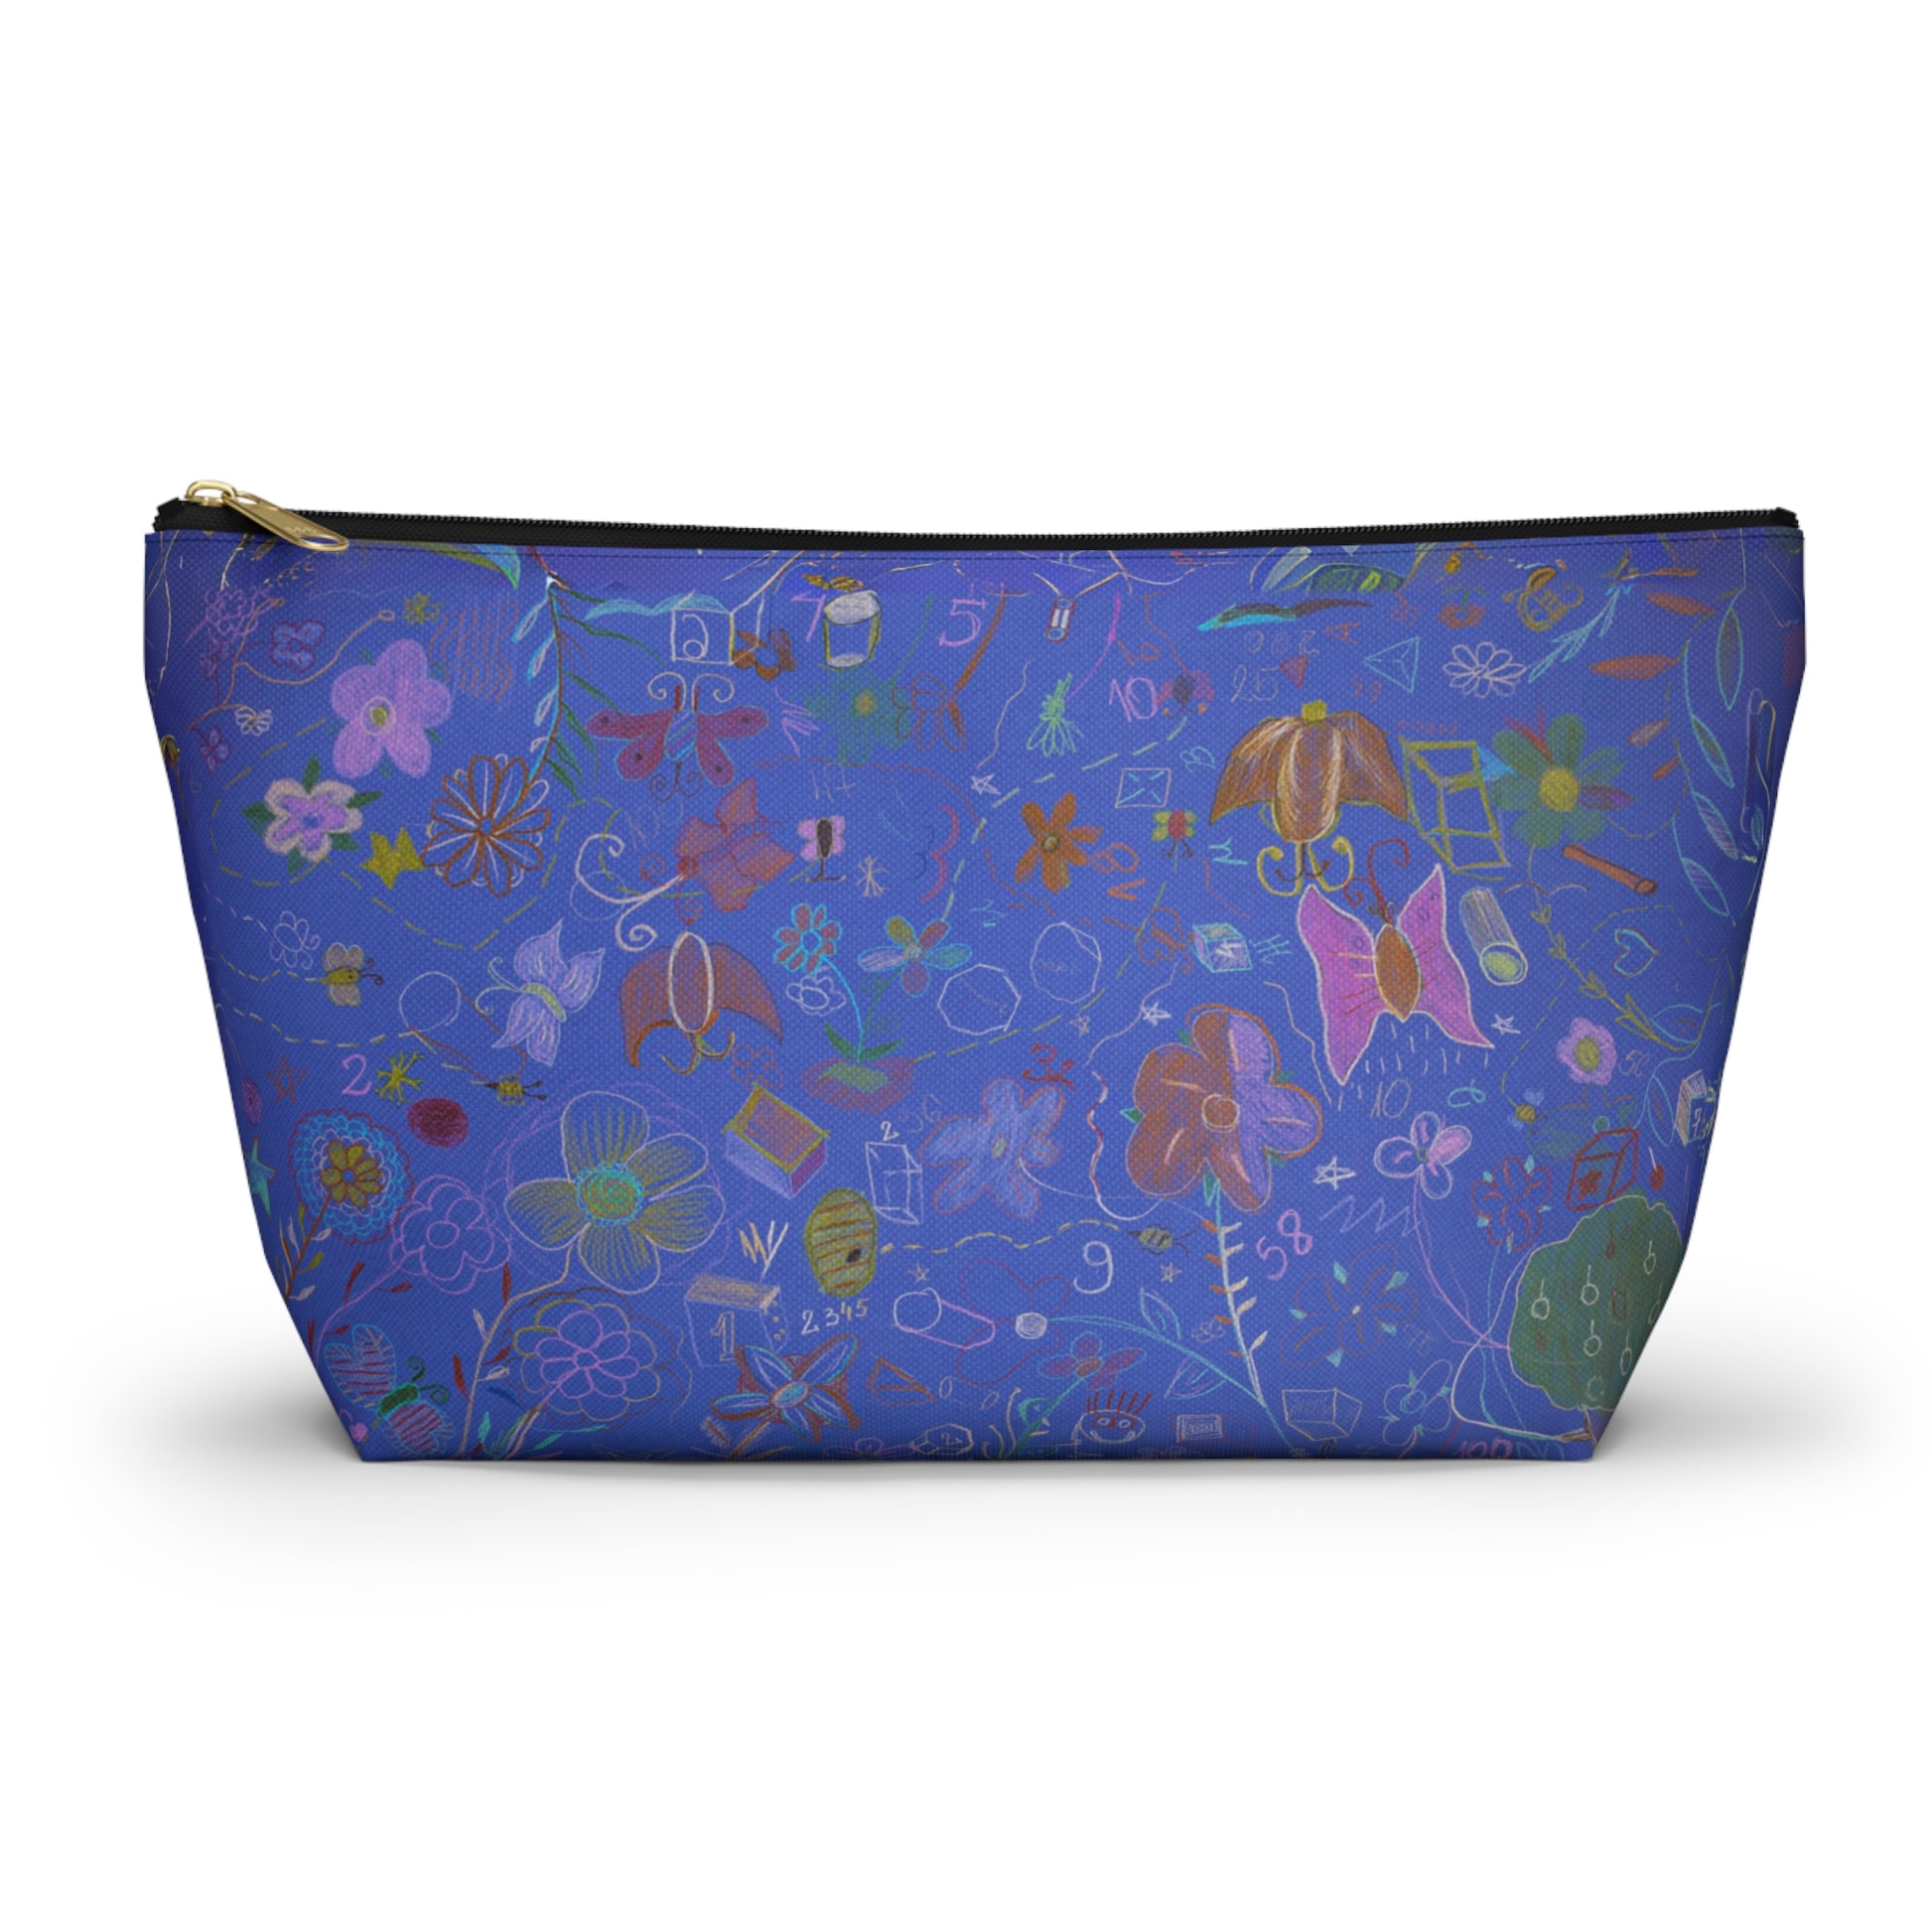 Everyday bag with T-bottom, perfect for accessories, makeup, technology or travel (Blue with drawings)